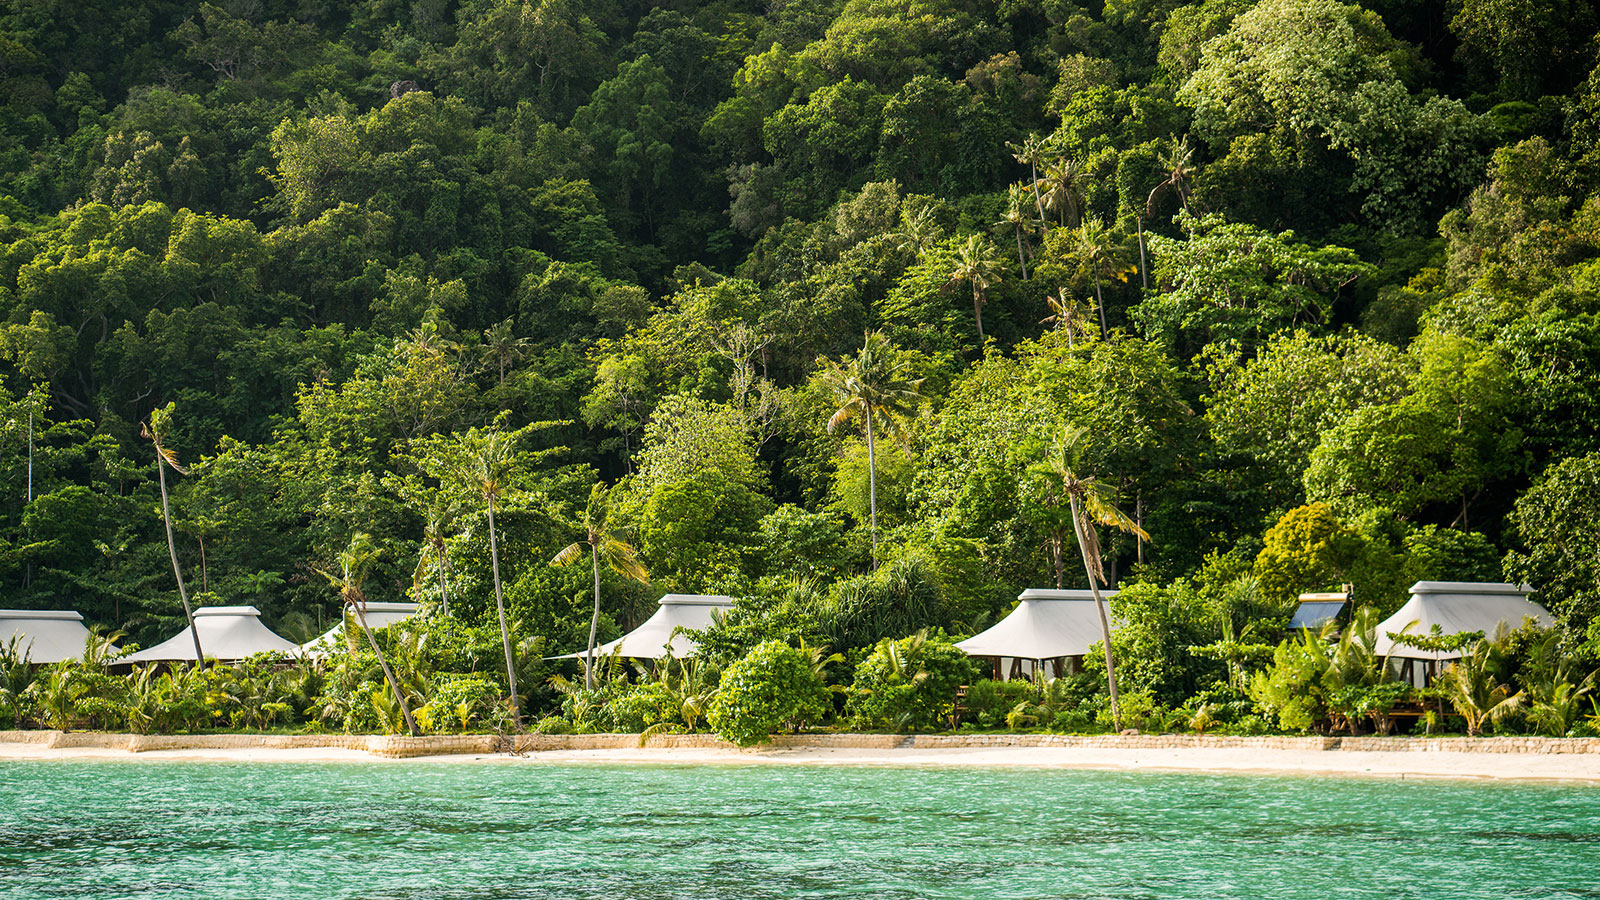 Discovering Indonesia's Bawah Reserve by Superyacht